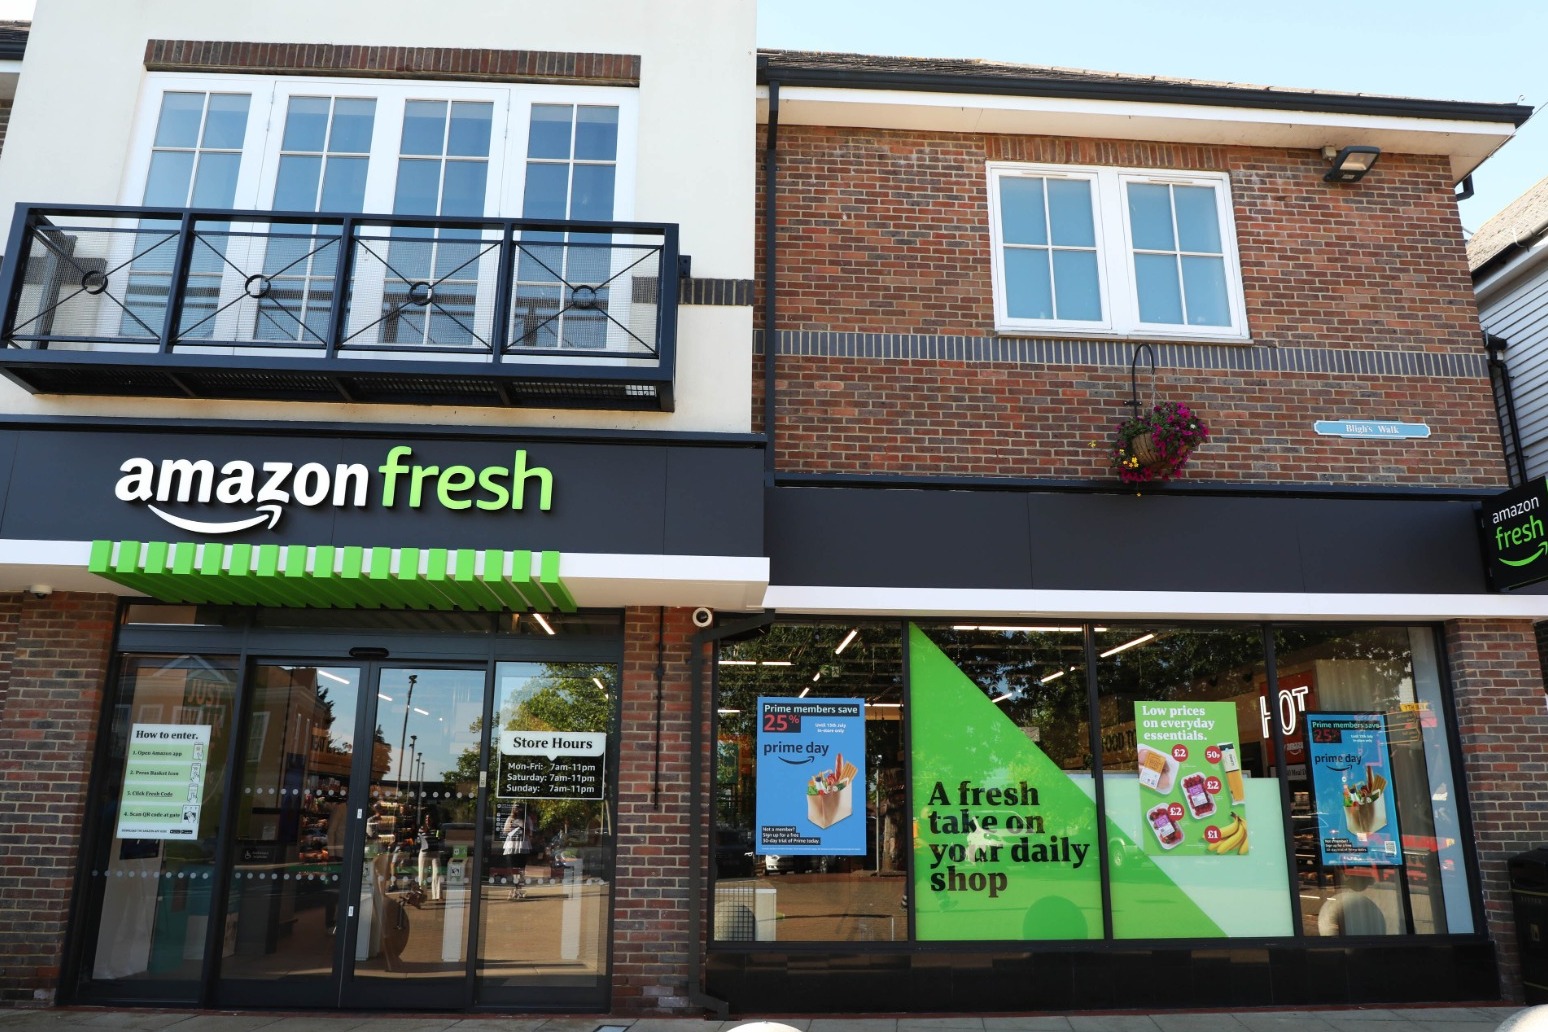 Amazon takes on Tesco with grocery price promise 